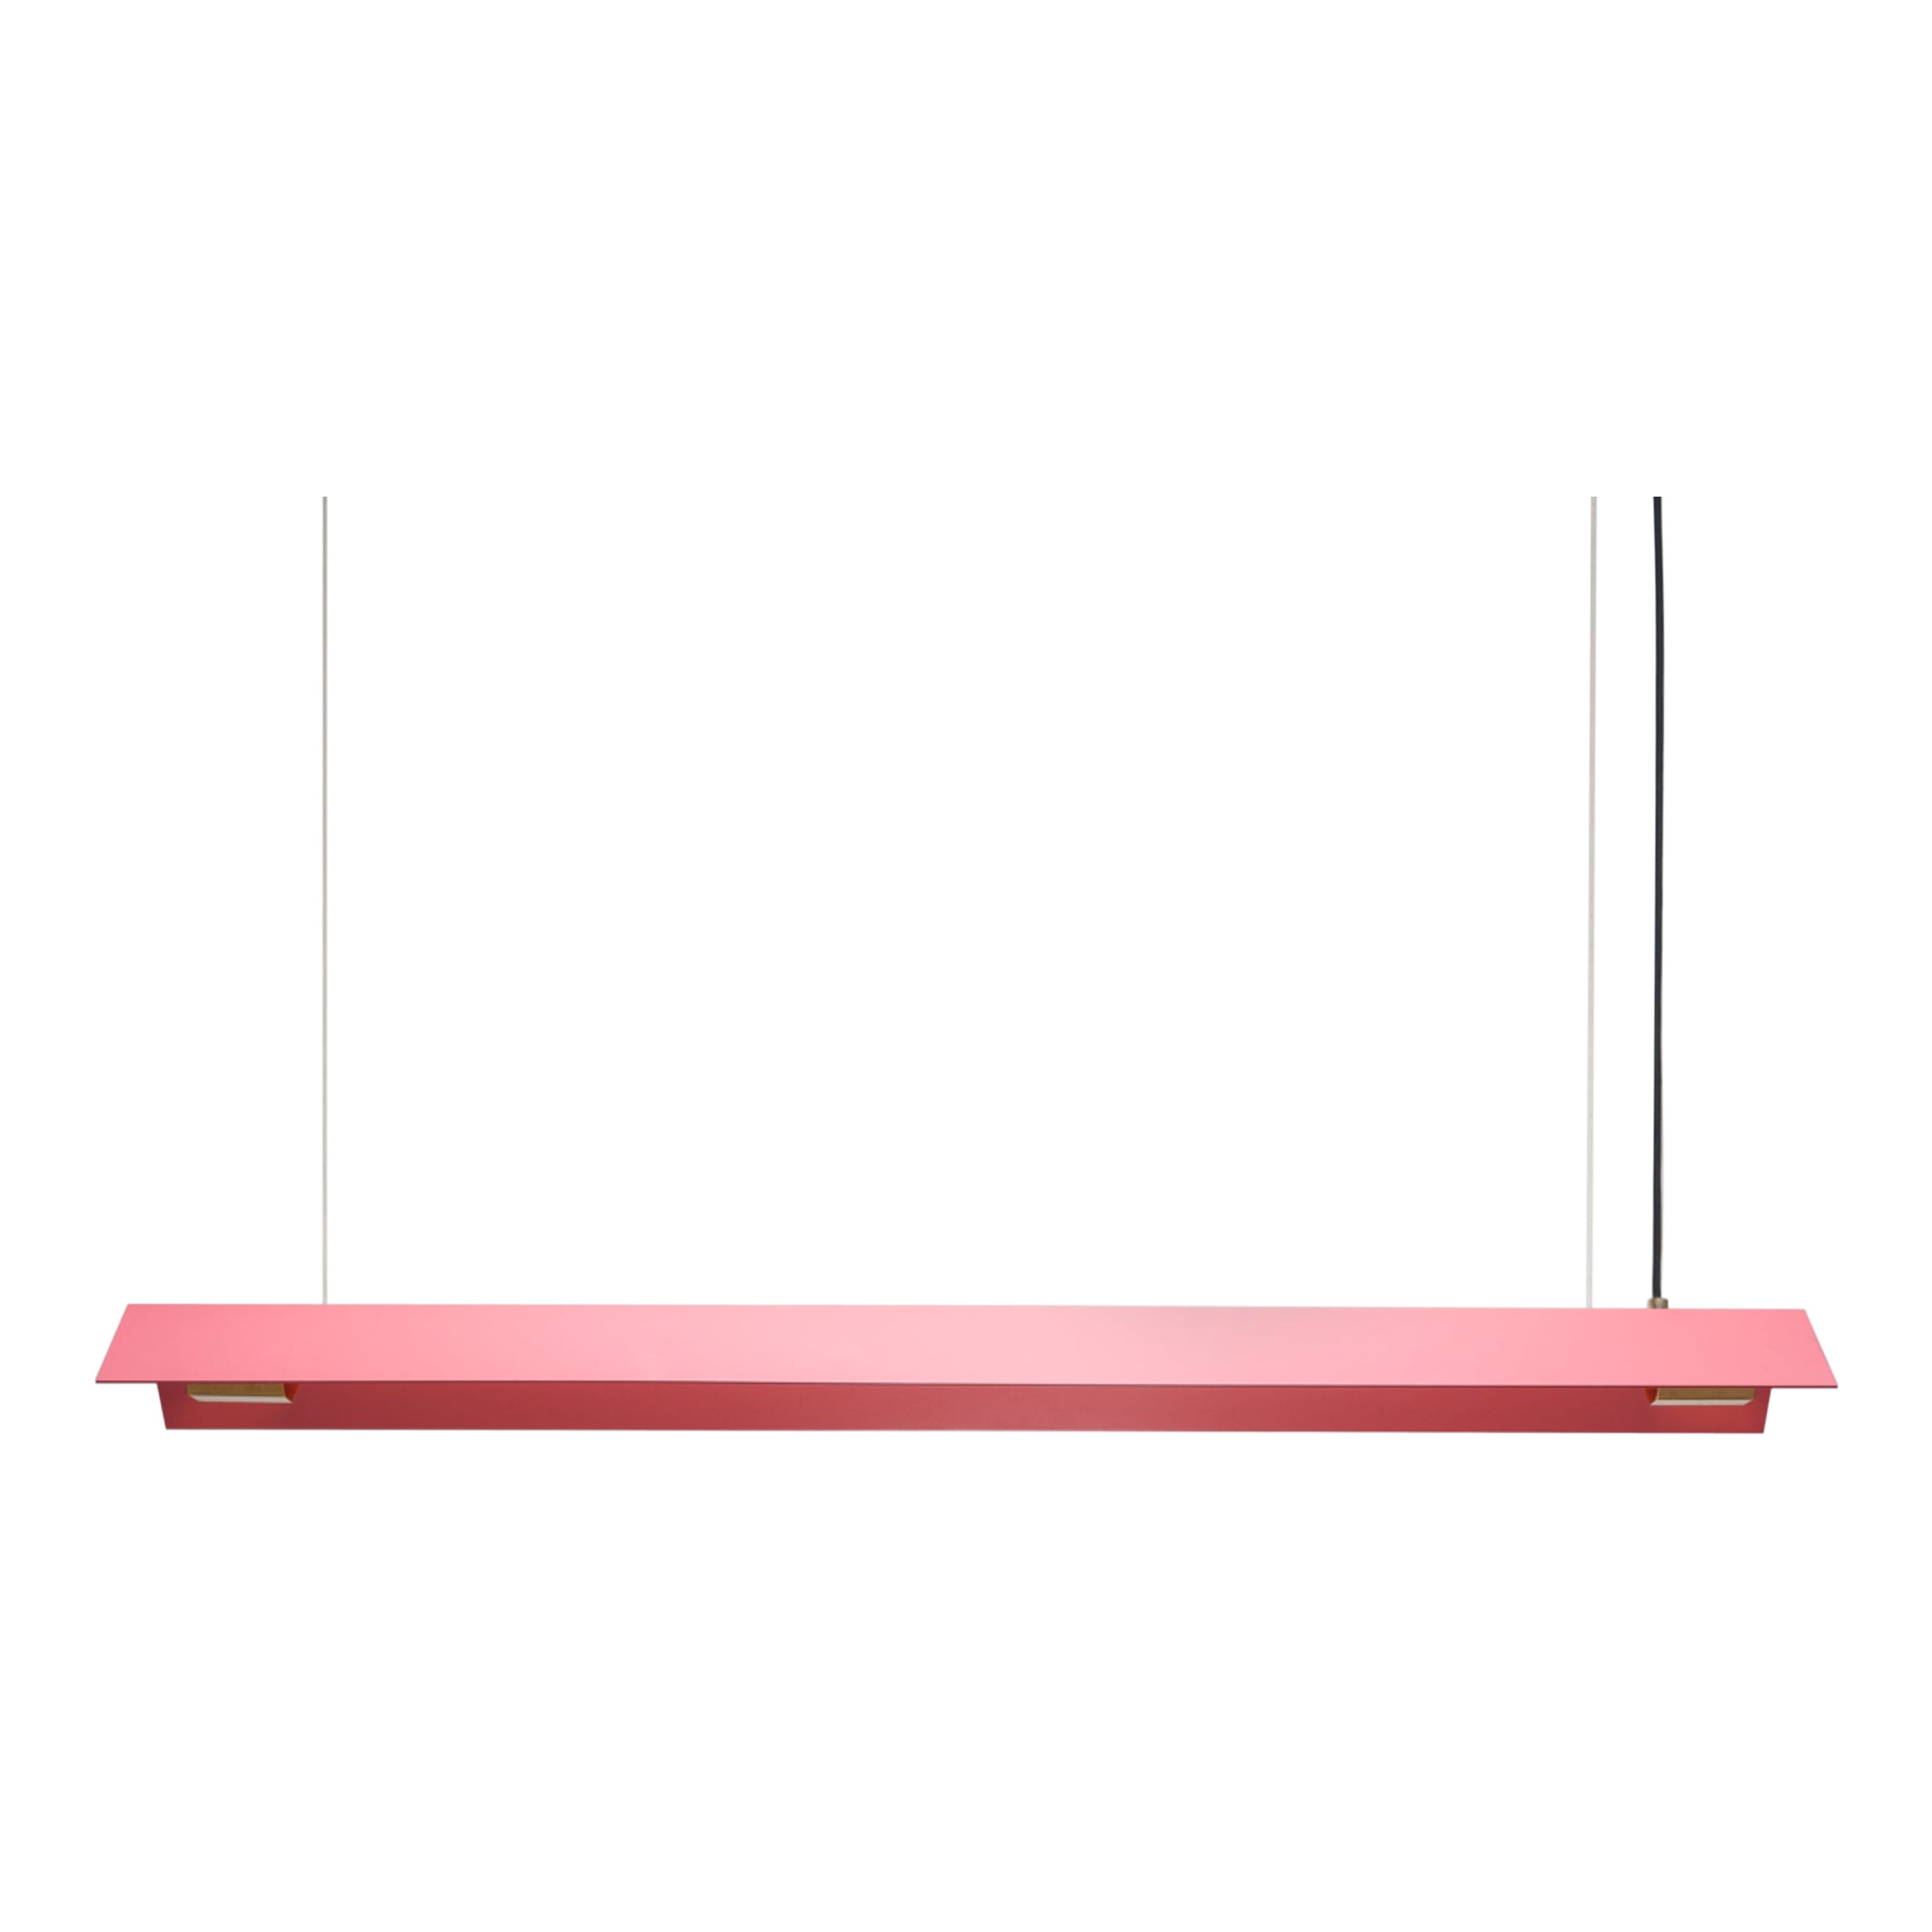 Small Misalliance Ex Antique Pink Suspended Light by Lexavala